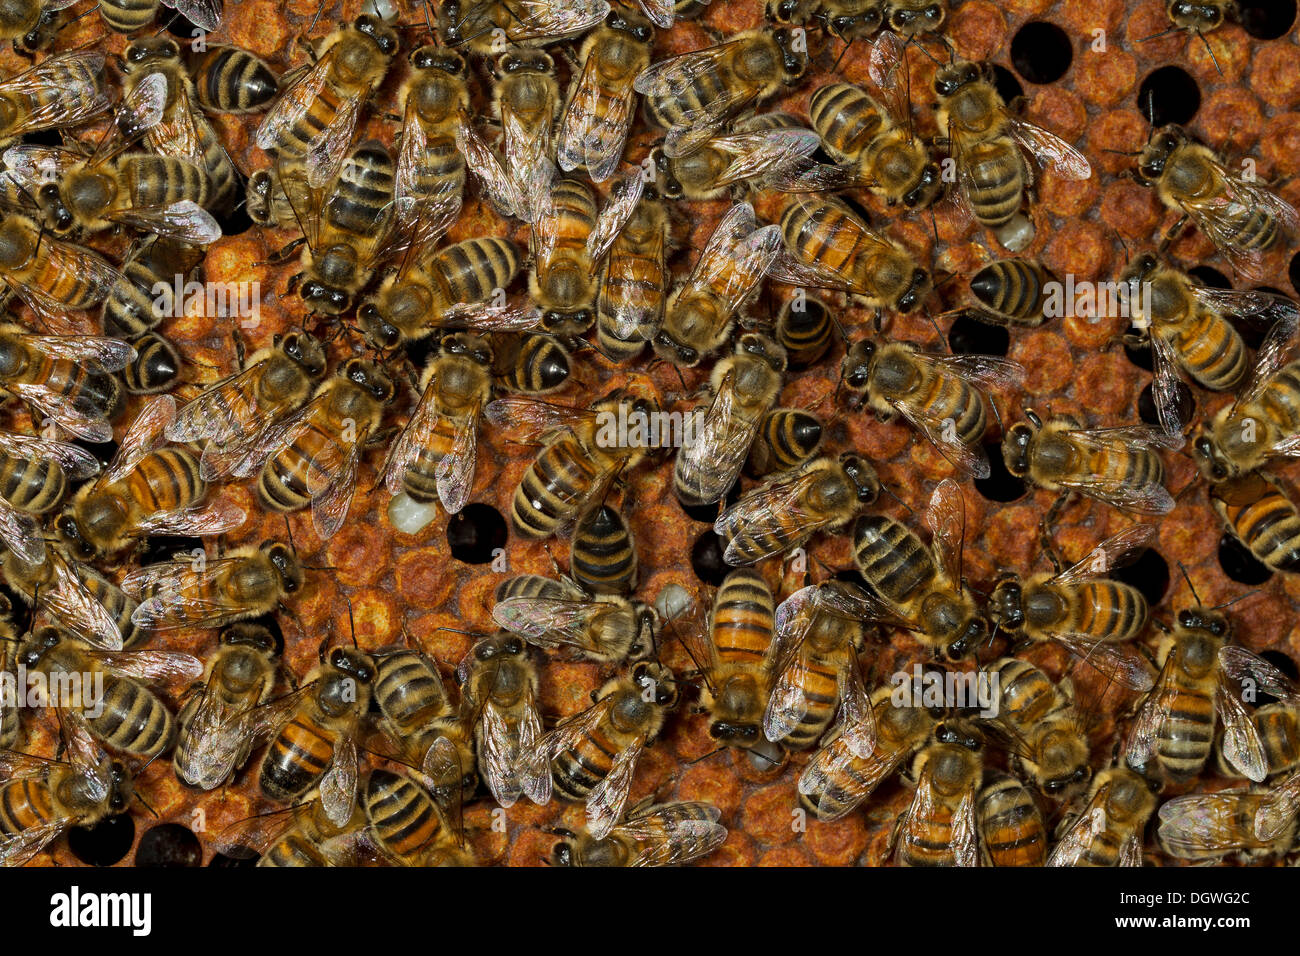 Western Honey Bees (Apis mellifera), workers on the sealed brood cells of a honeycomb, Thuringia, Germany Stock Photo